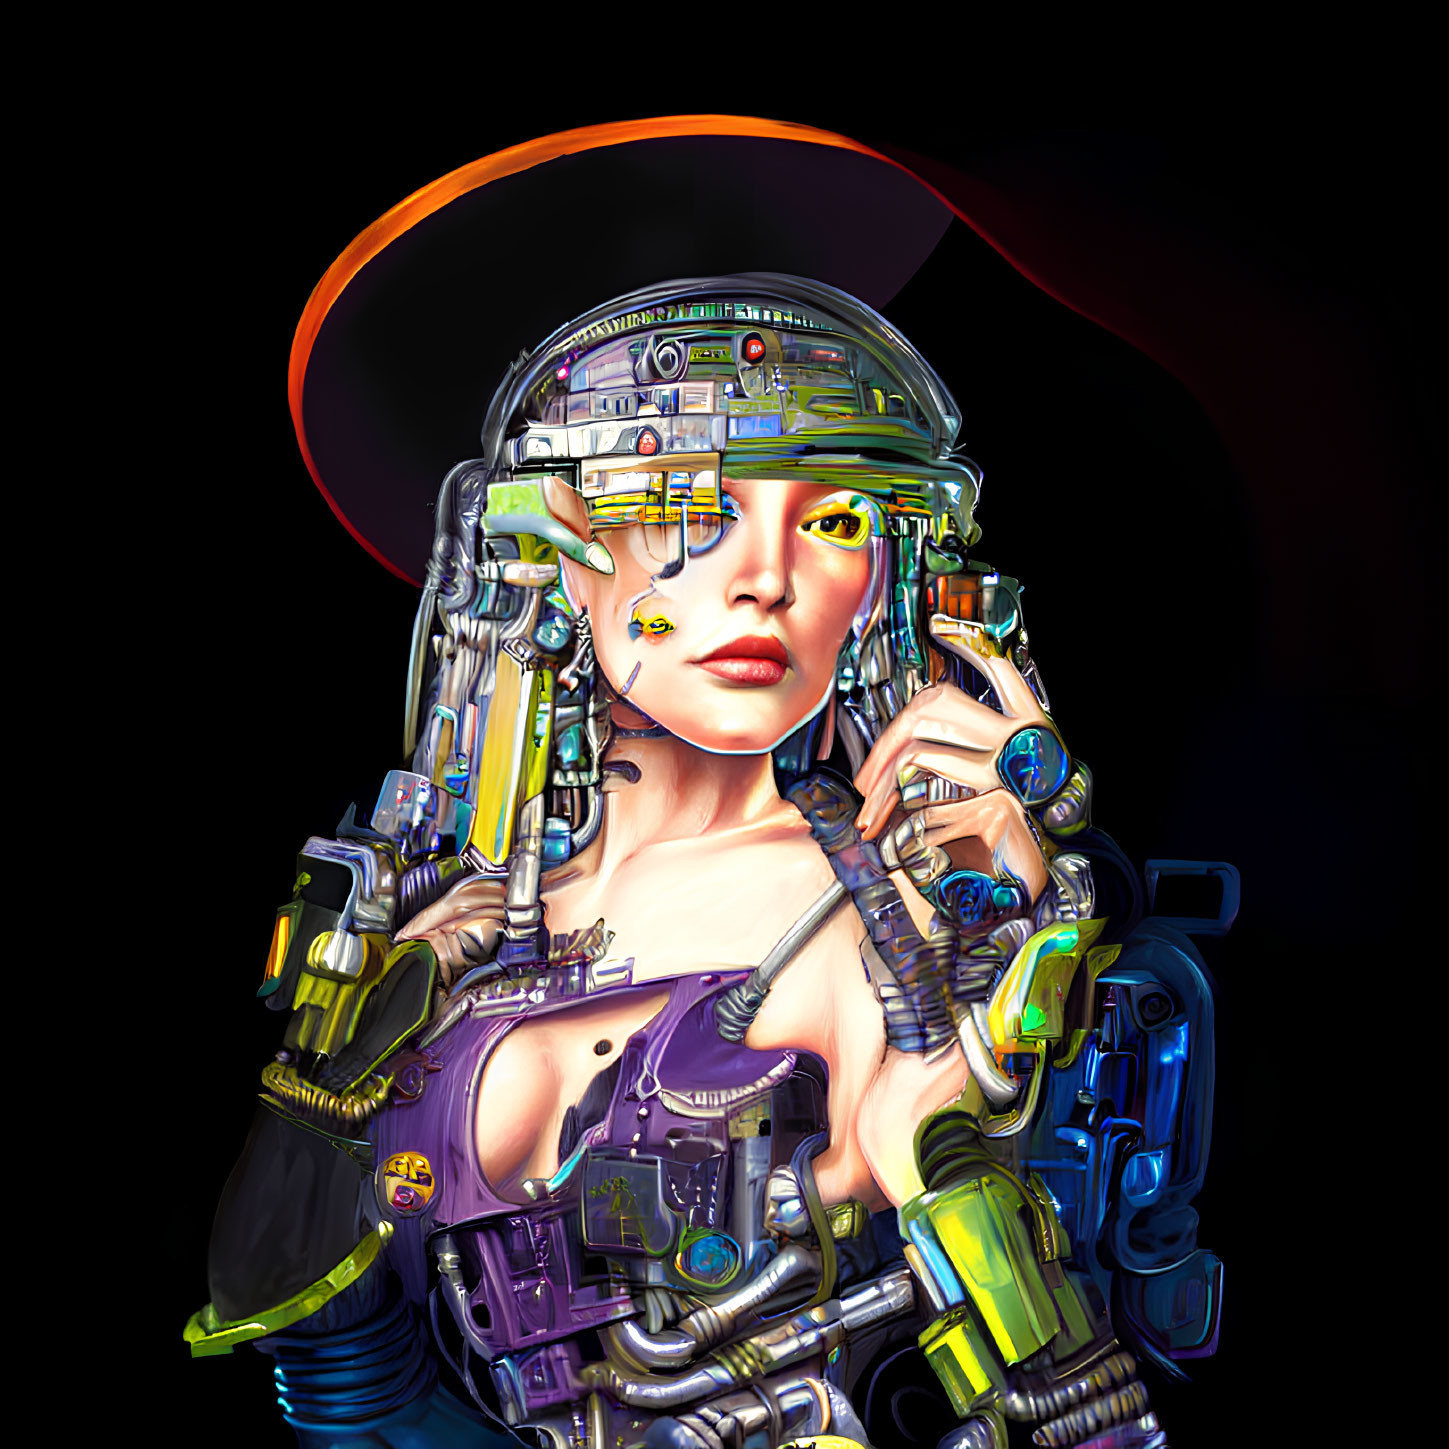 Futuristic female cyborg with glowing yellow eyes and cybernetic arms